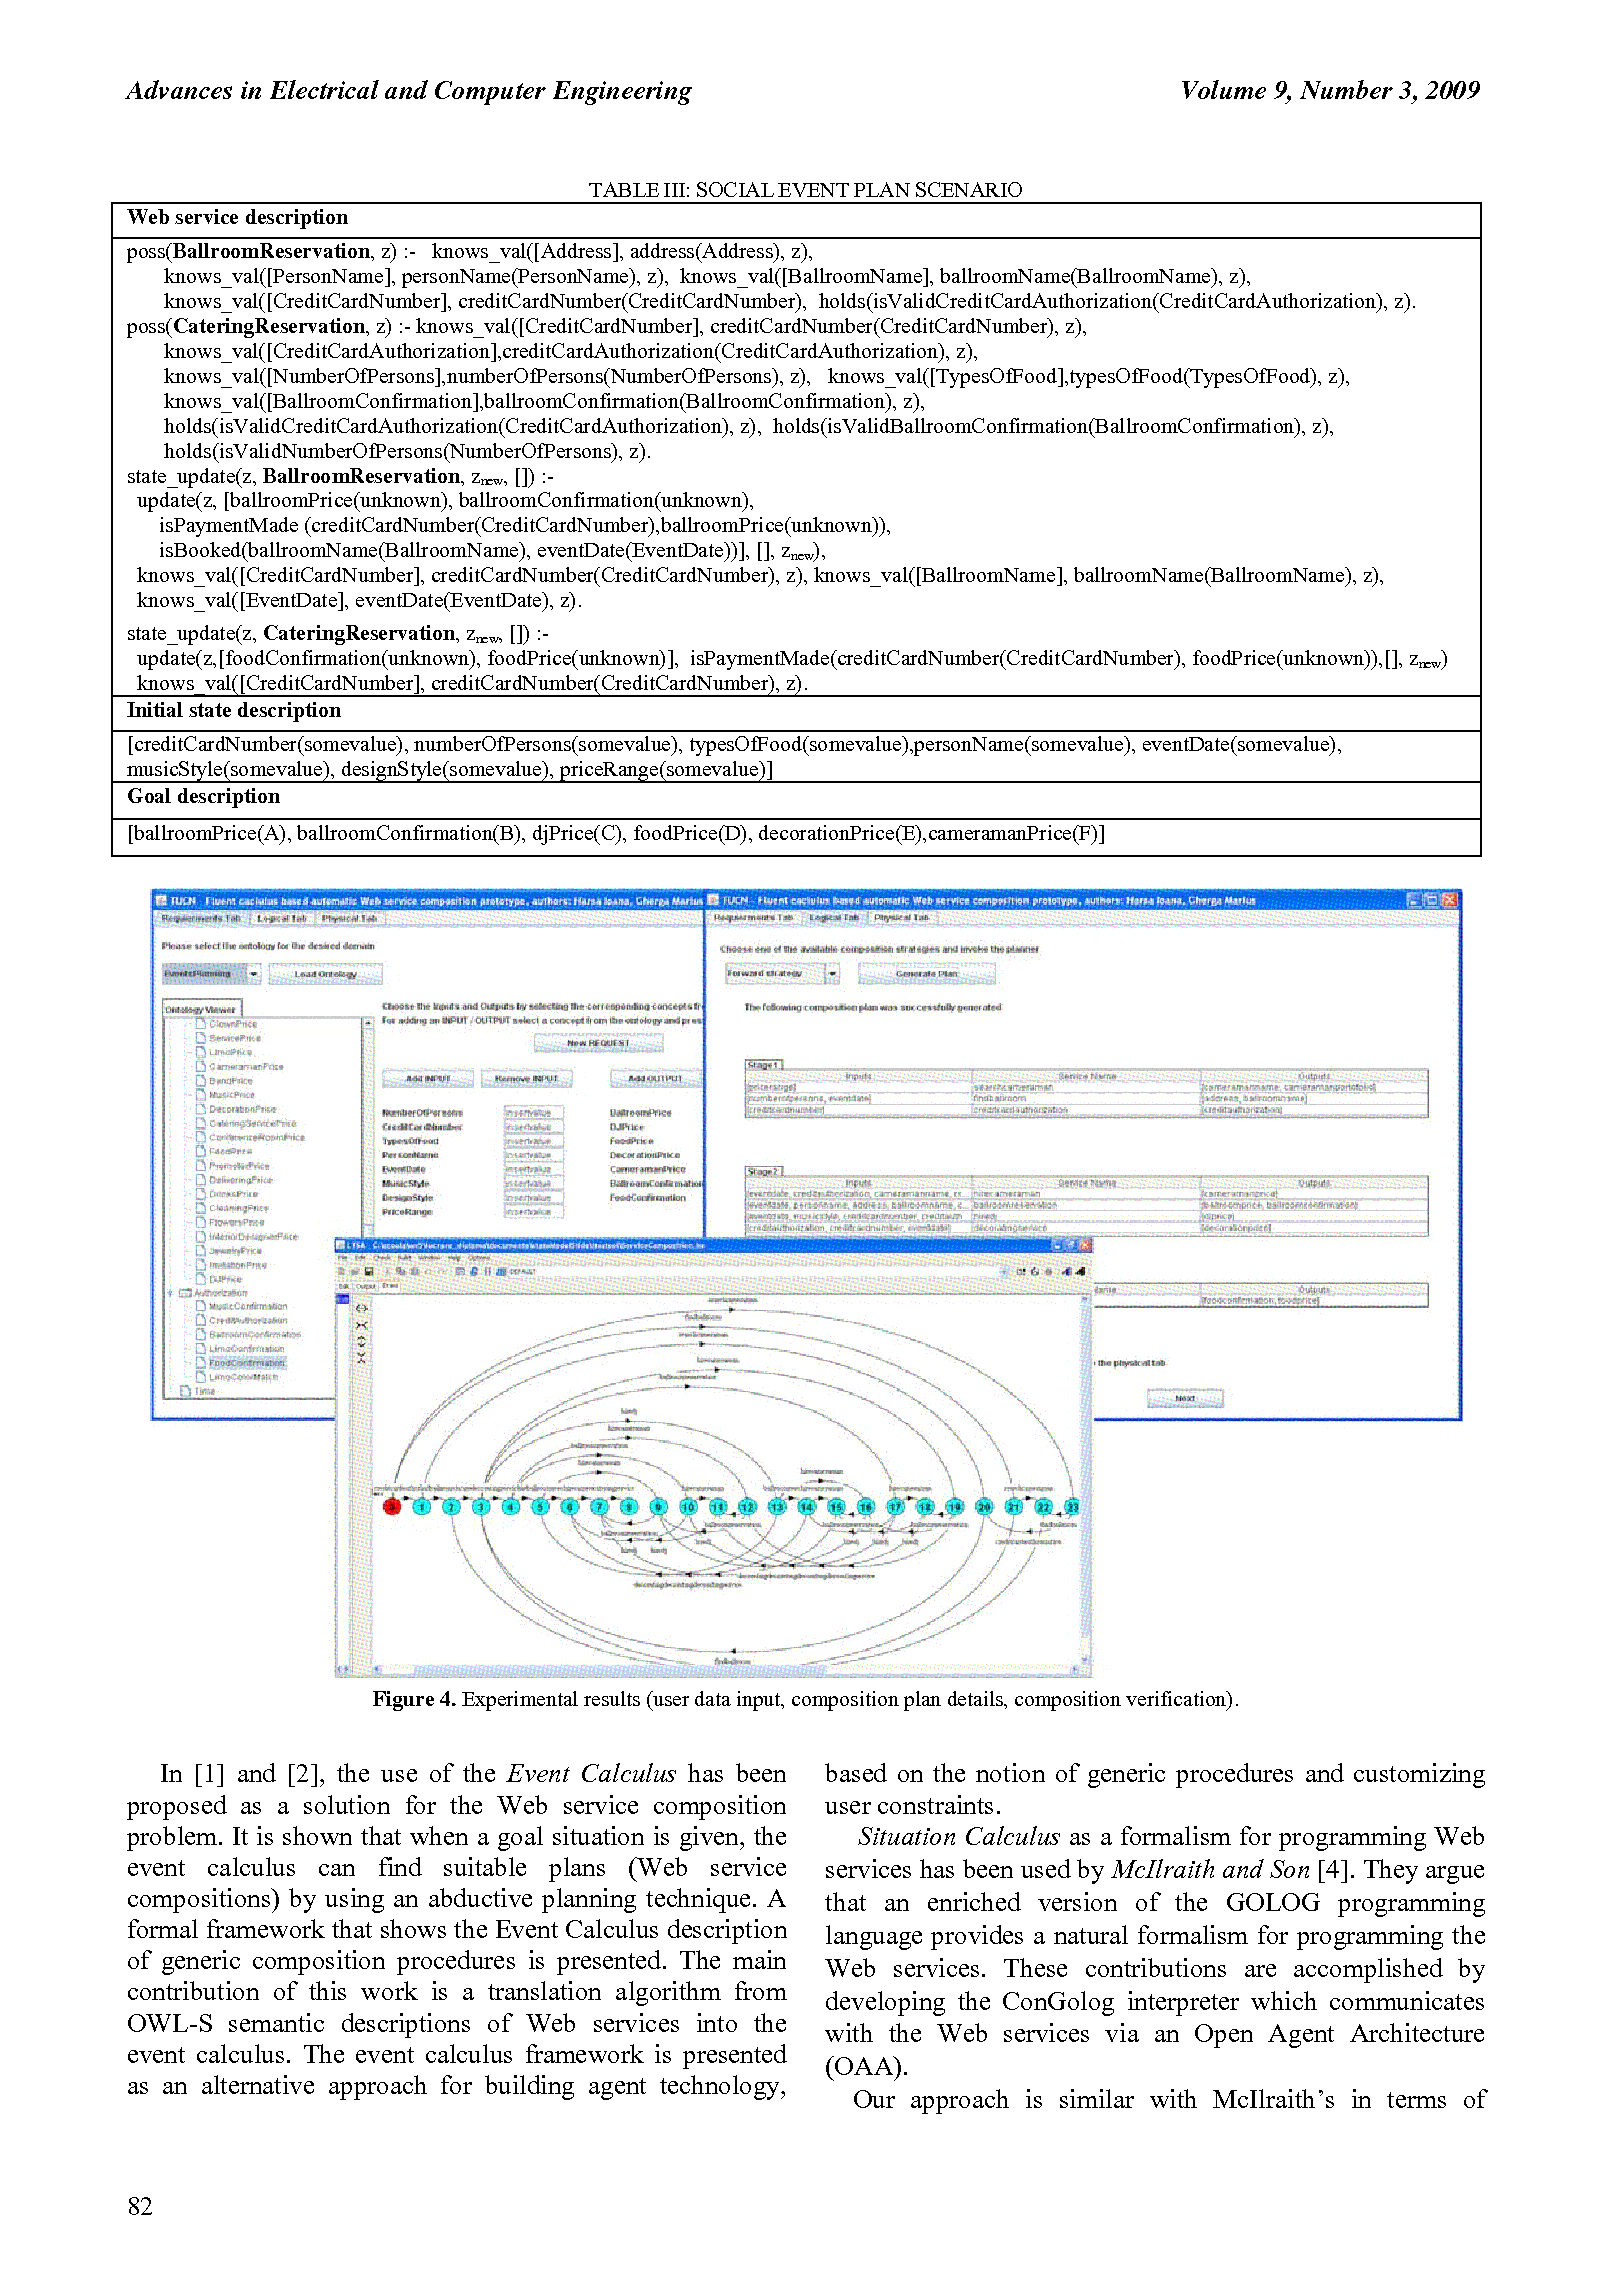 PDF Quickview for paper with DOI:10.4316/AECE.2009.03014